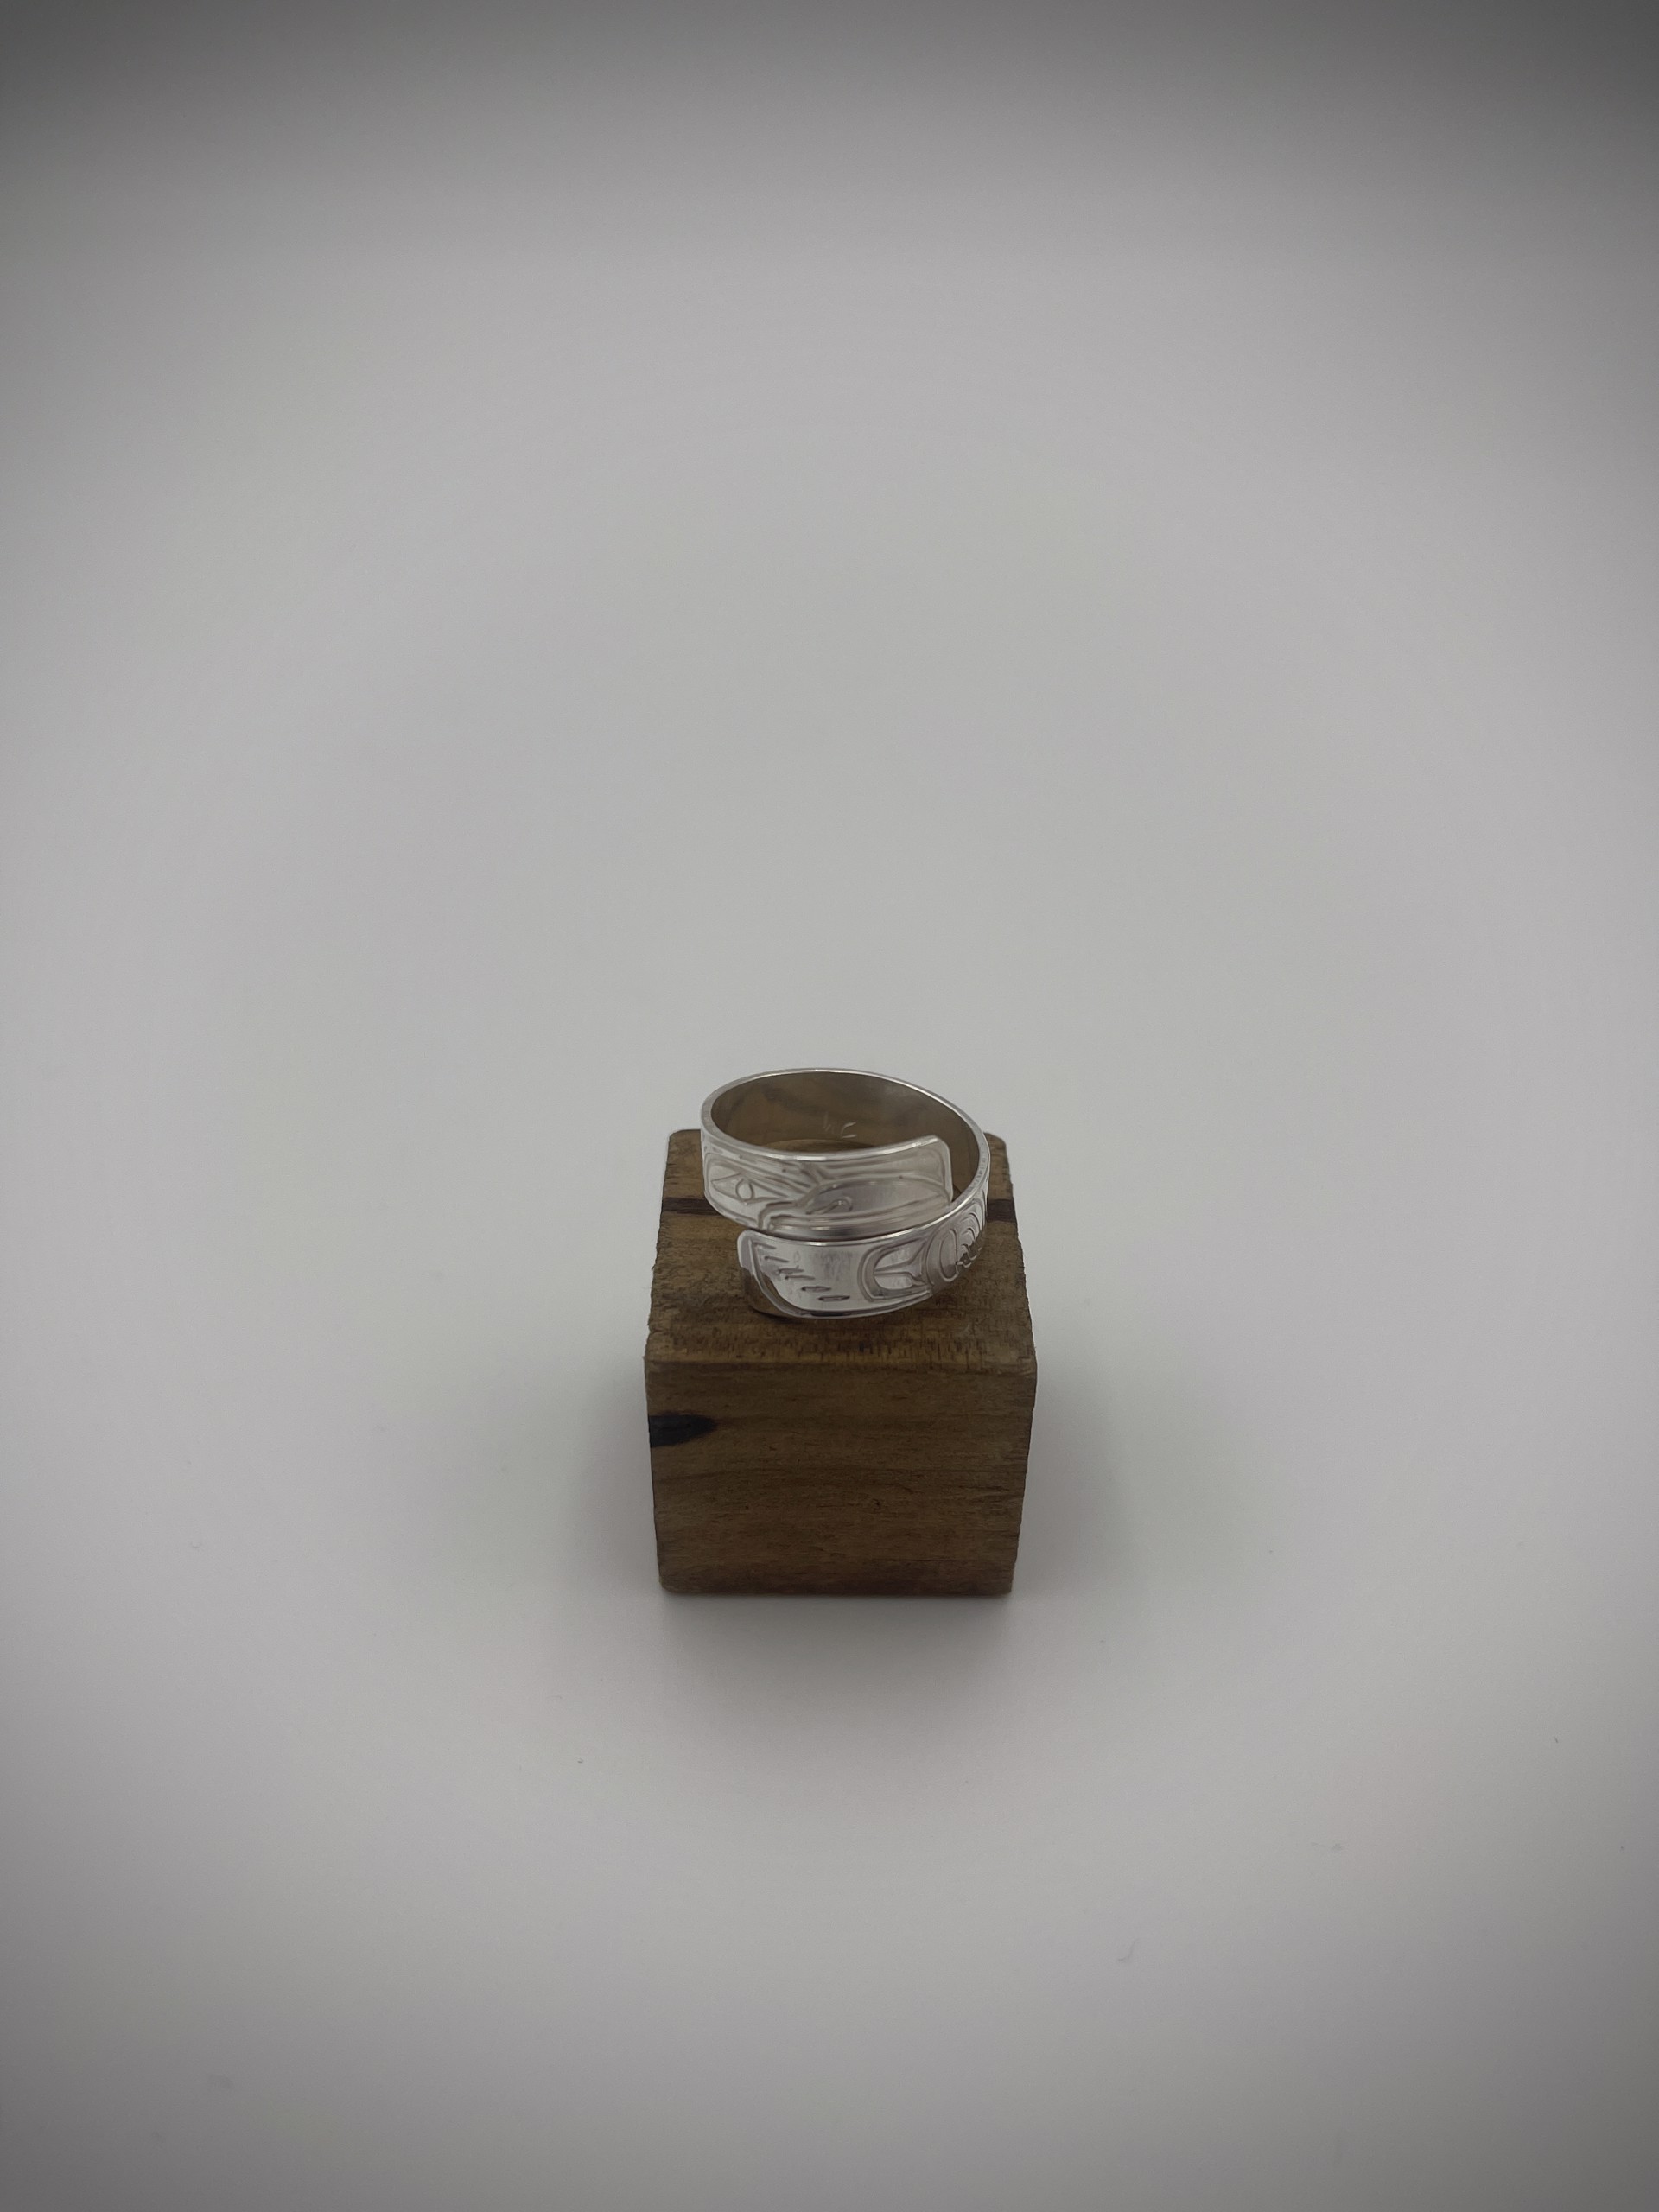 Wrap Ring by William Cook